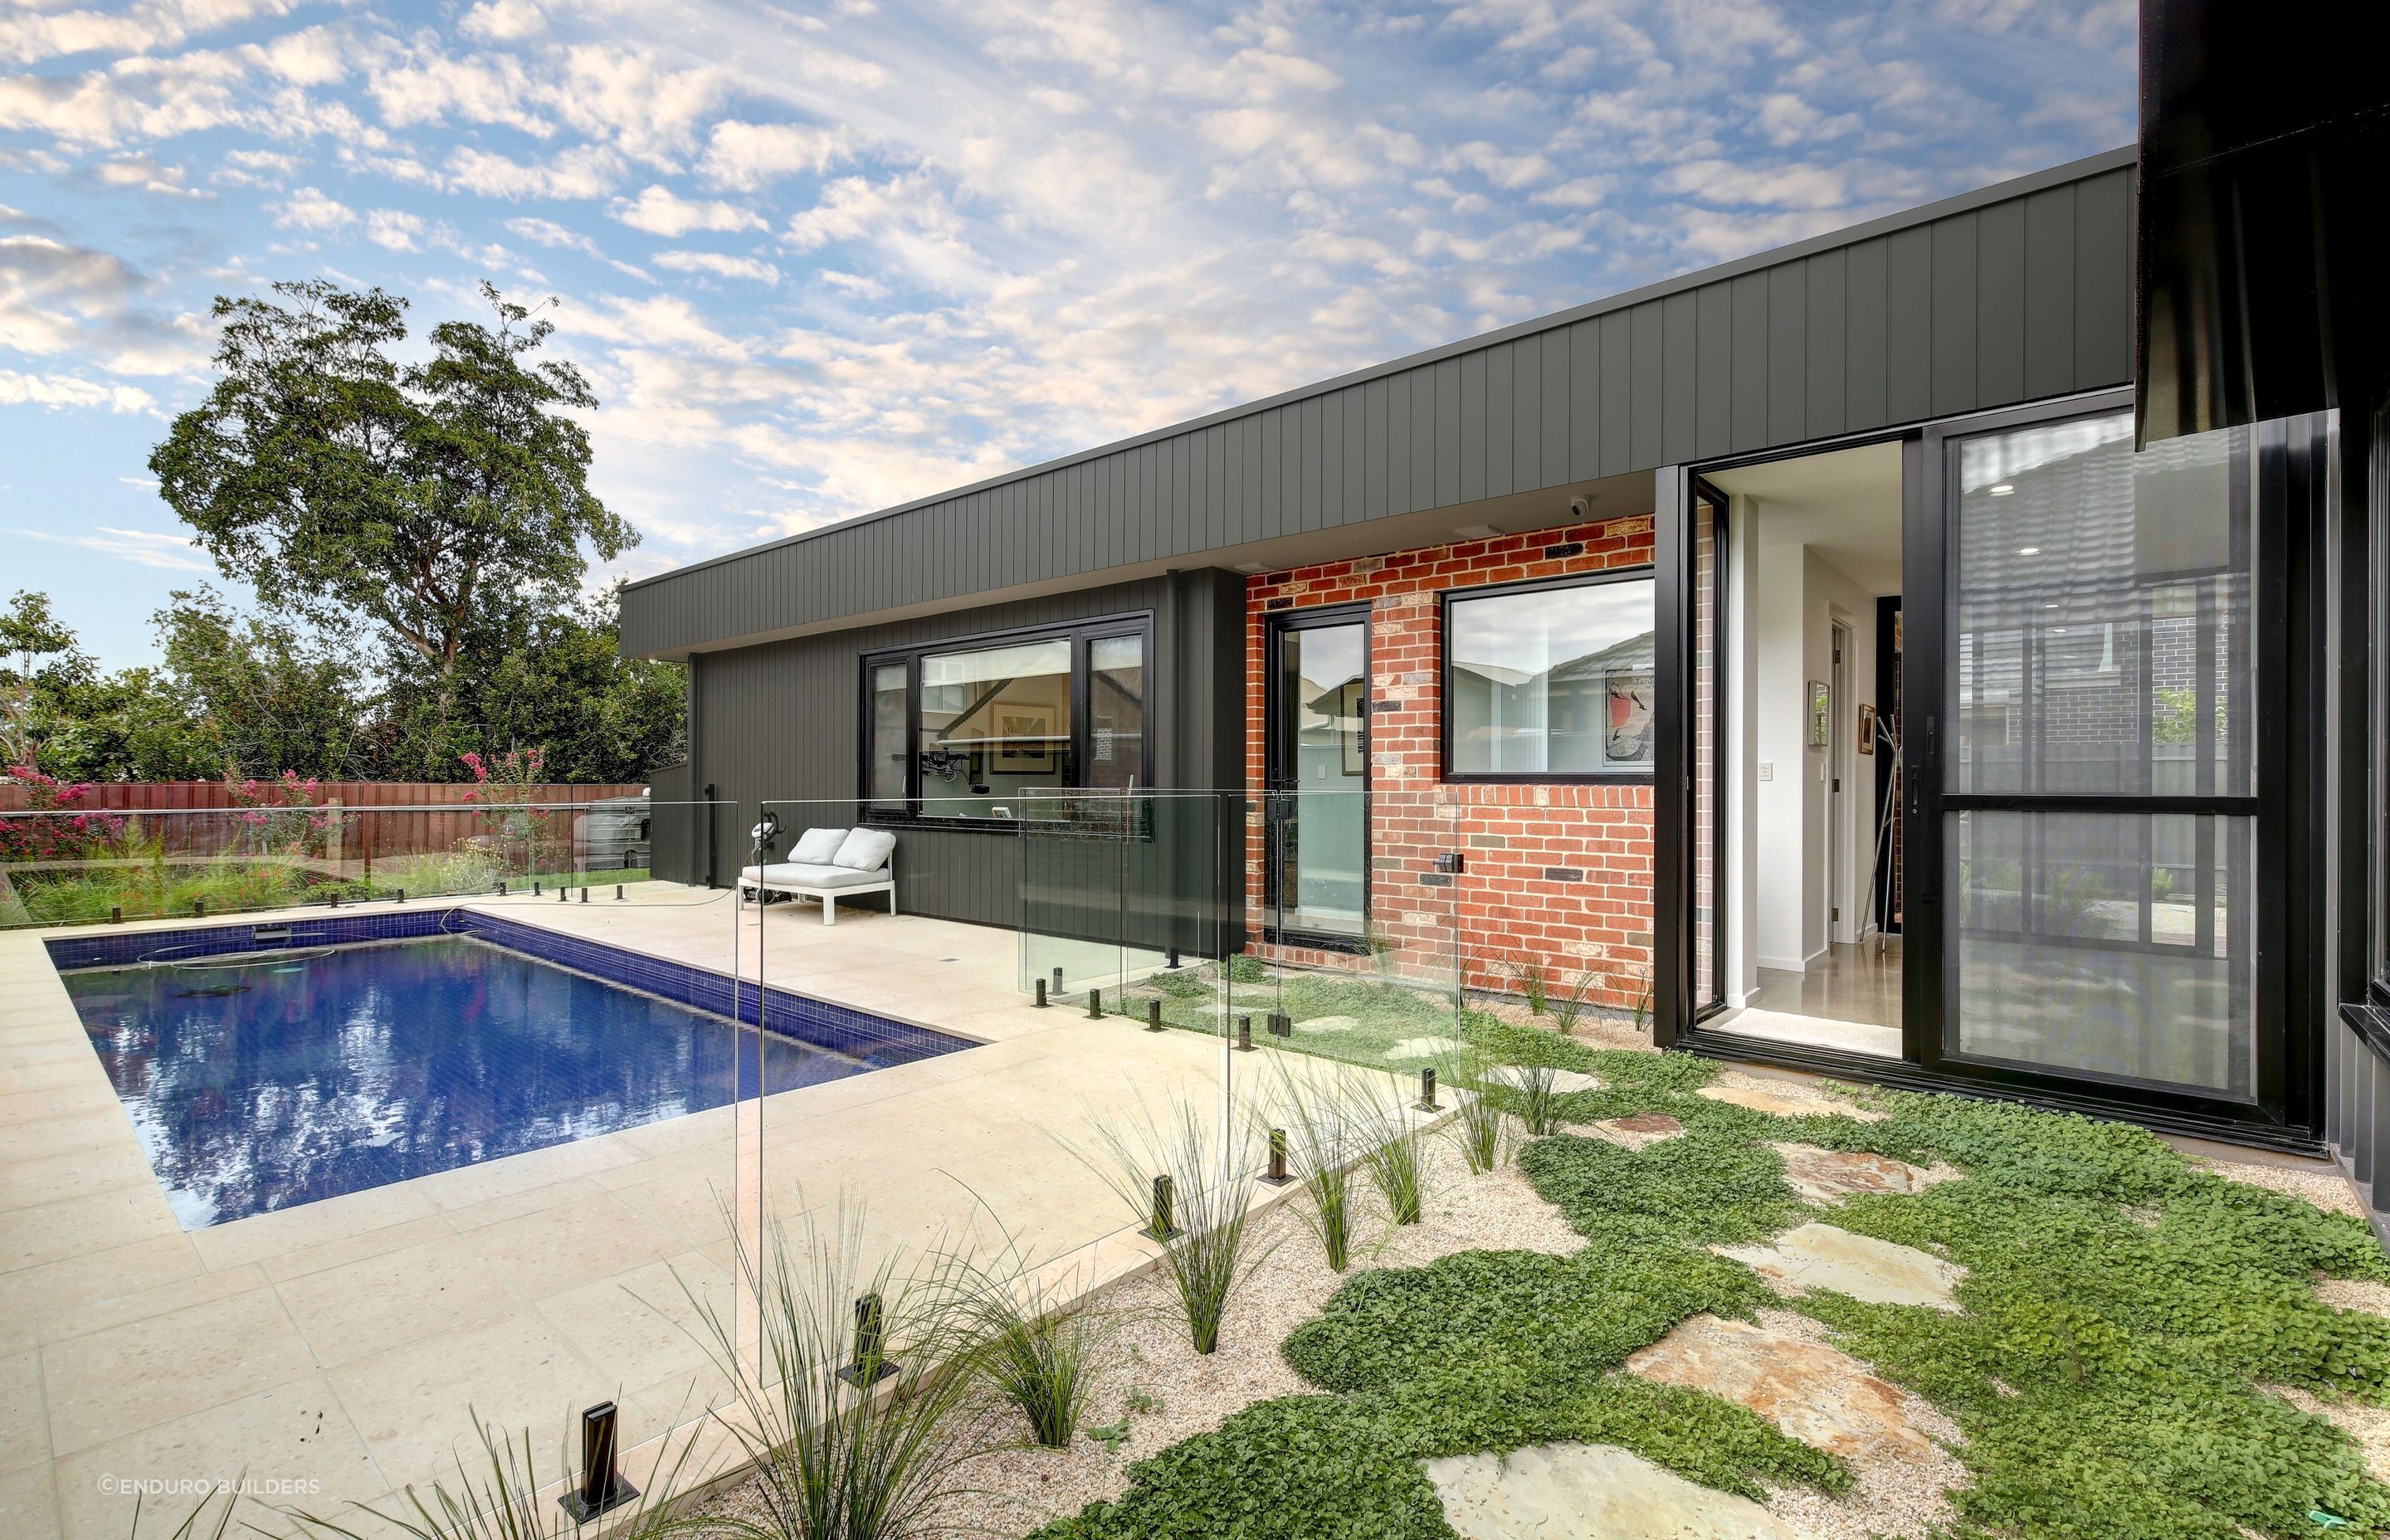 Pavers are a straightforward, practical choice for connecting an outdoor space with a pool area. Featured project: Payneham South - Enduro Builders